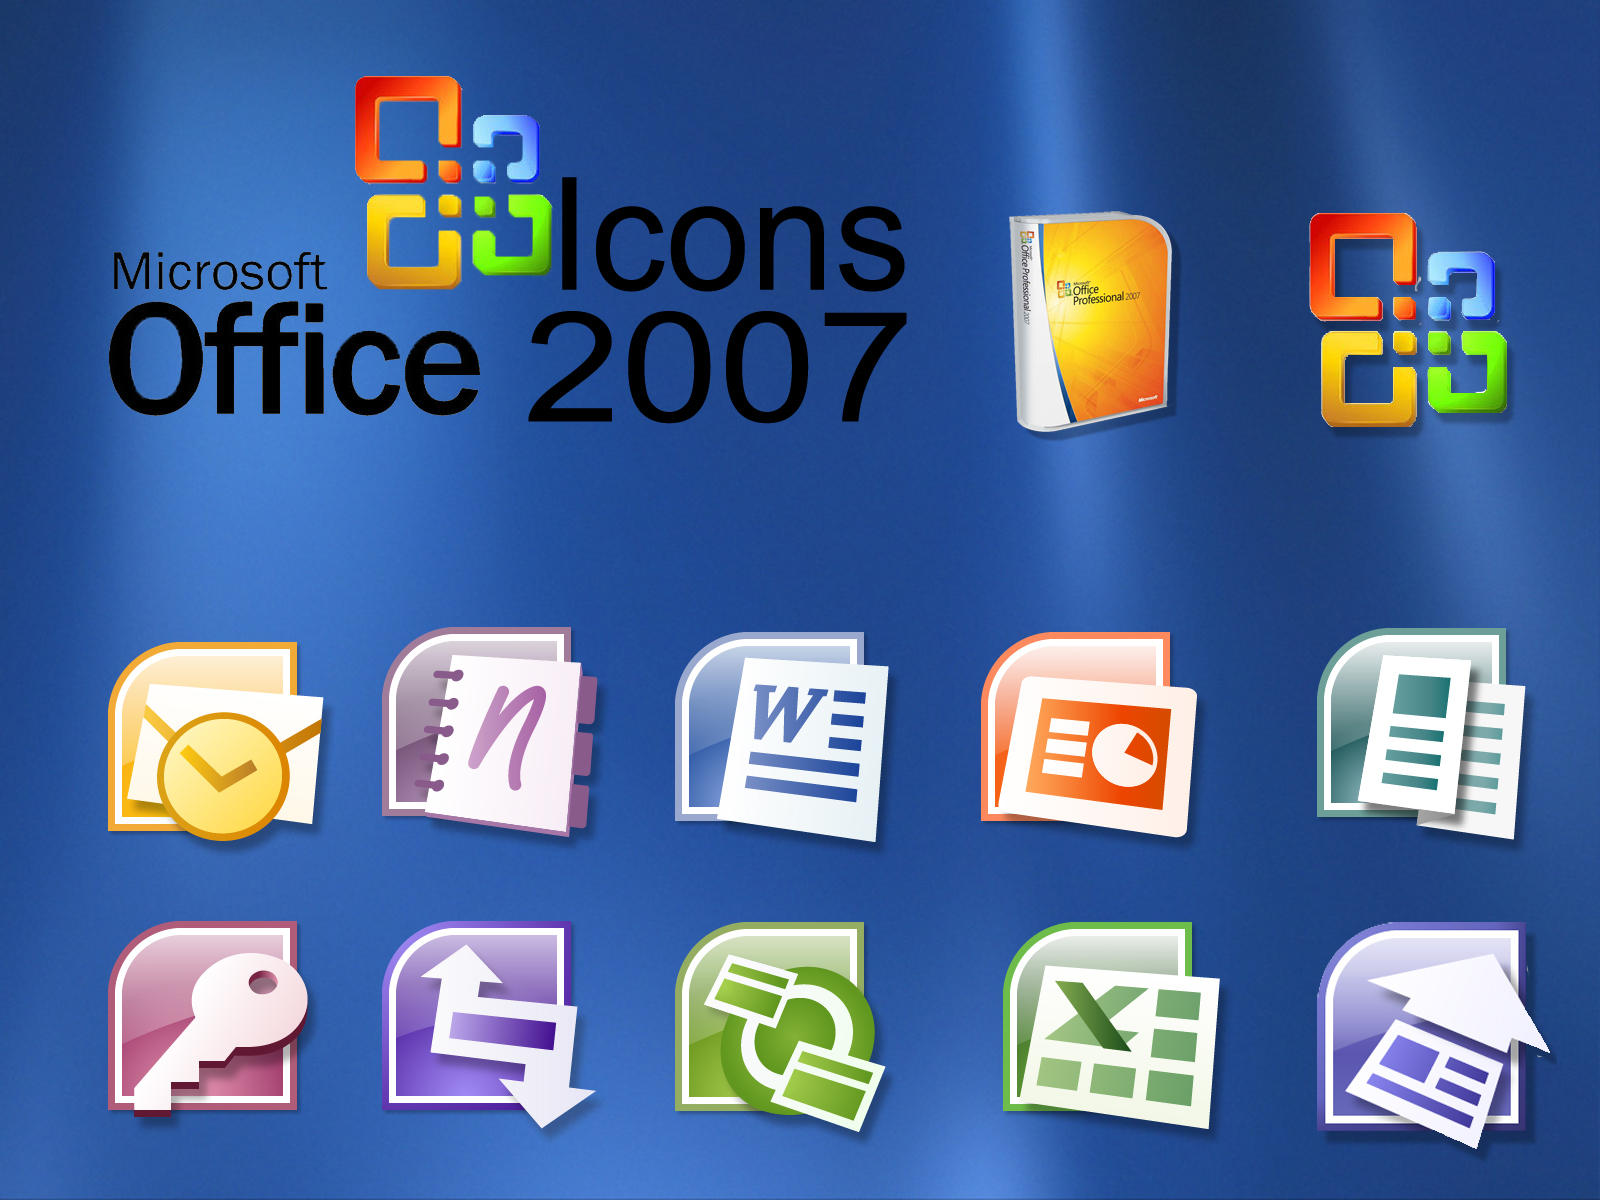 Microsoft Office 2007 Icons Not Showing